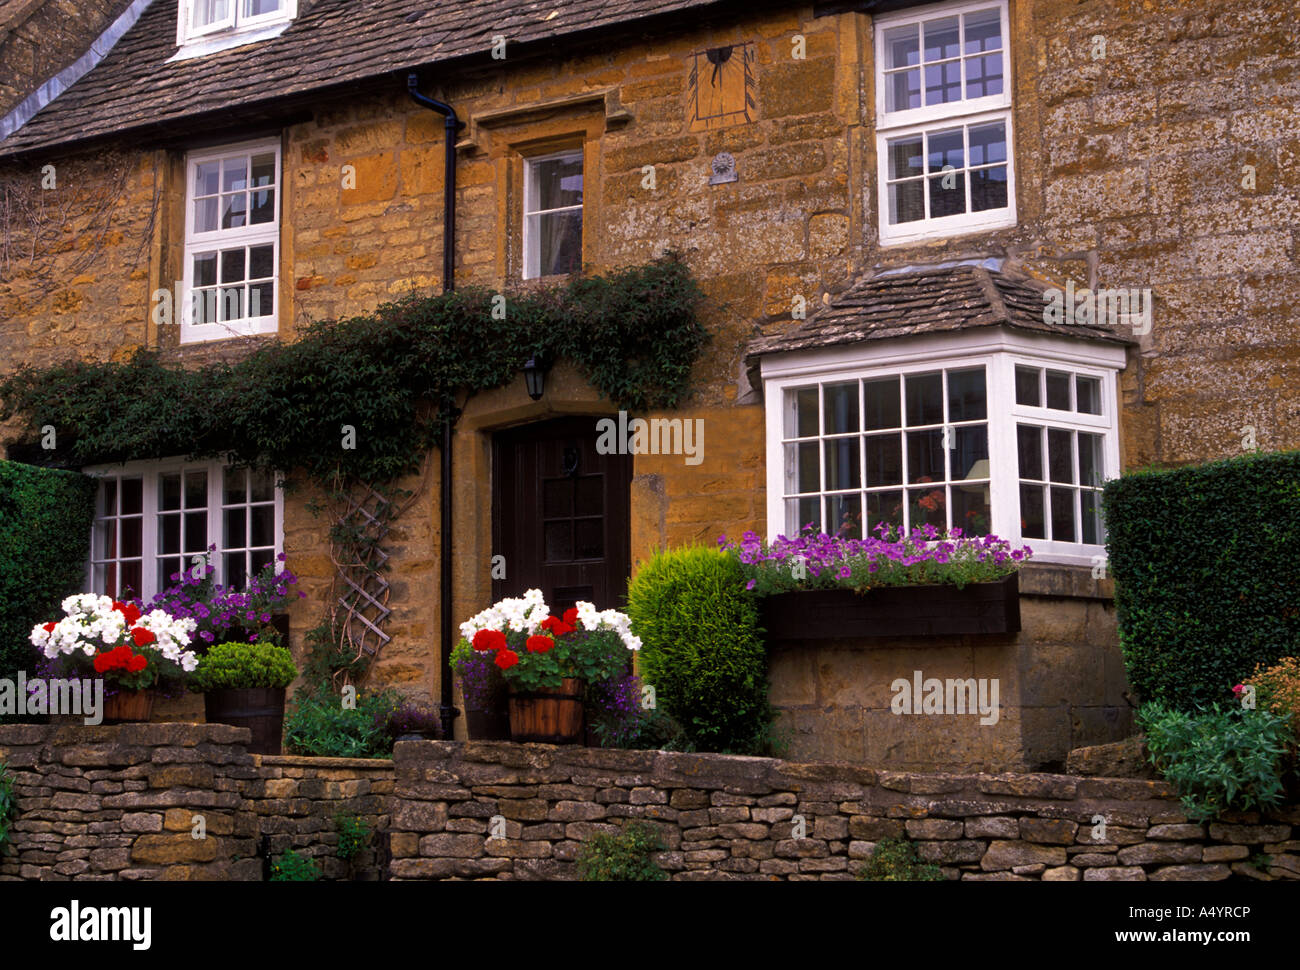 Architecture stone building in the village of Bourton-on-the-Hill in Gloucestershire County England Europe Stock Photo